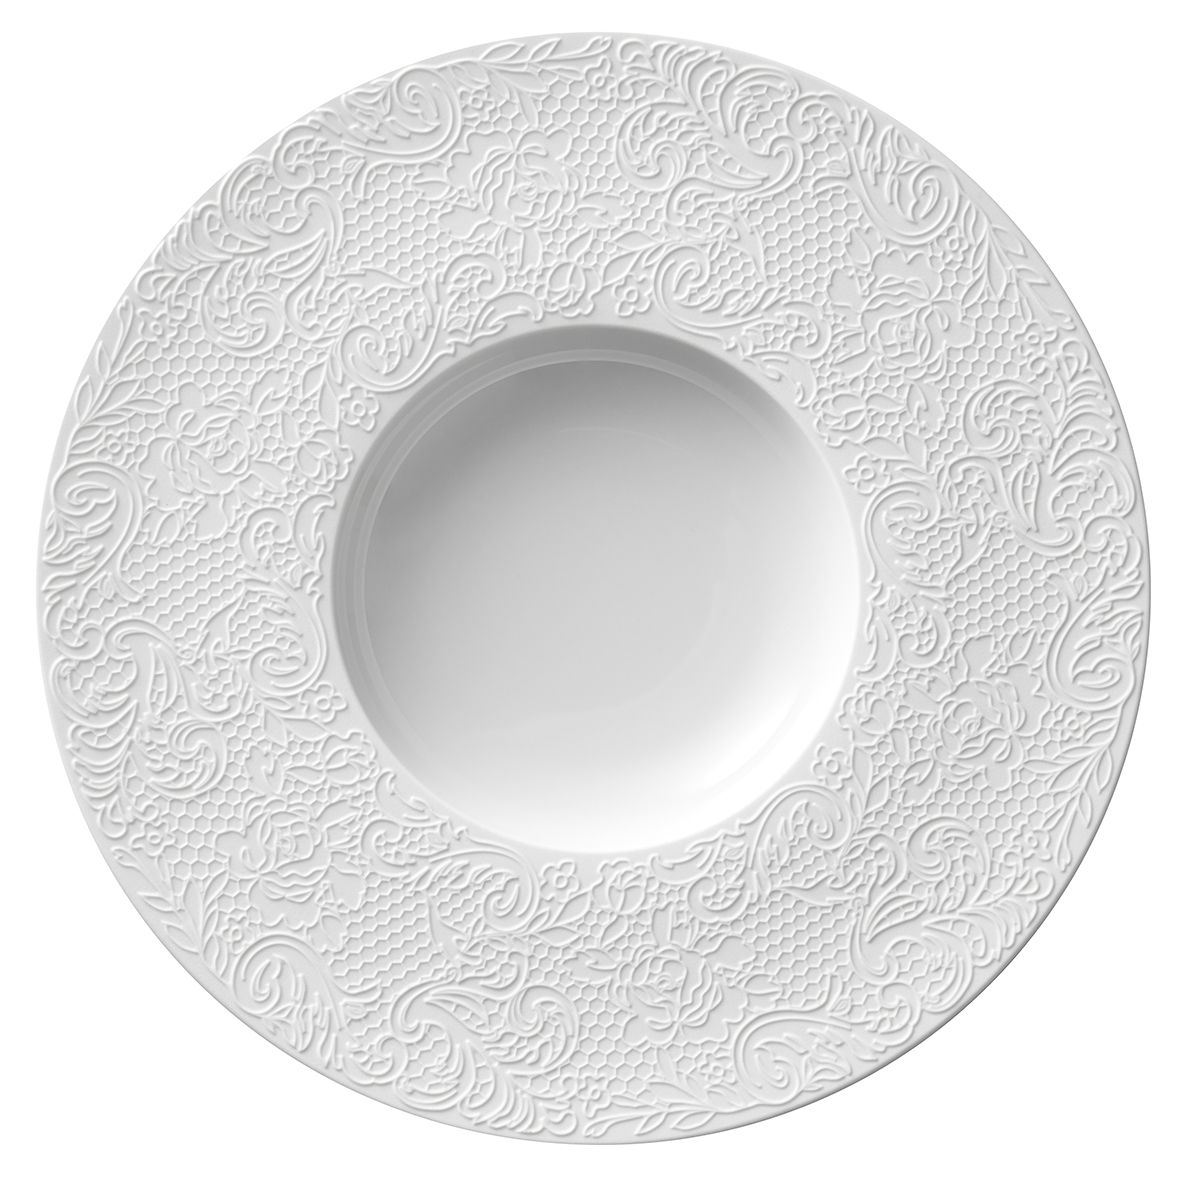 Round gourmet plate 28 cm Degrenne L couture collection